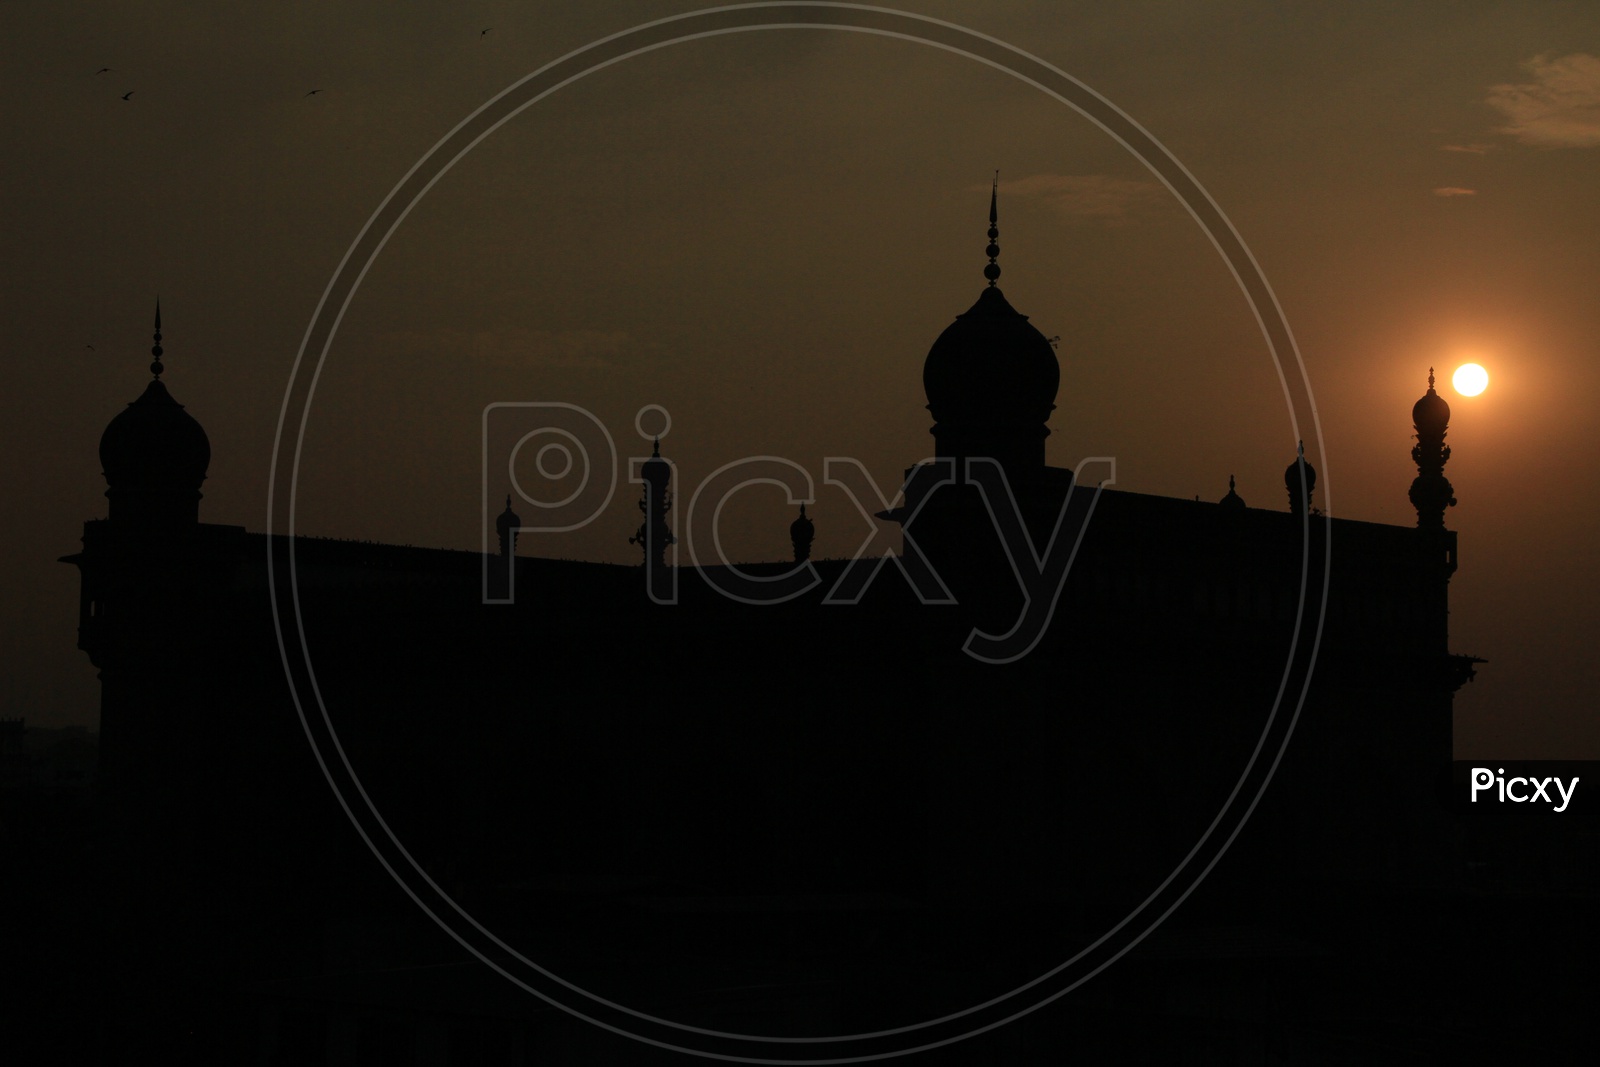 Silhouette Of Mecca masjid With Golden Hour Sunset Sky in Background